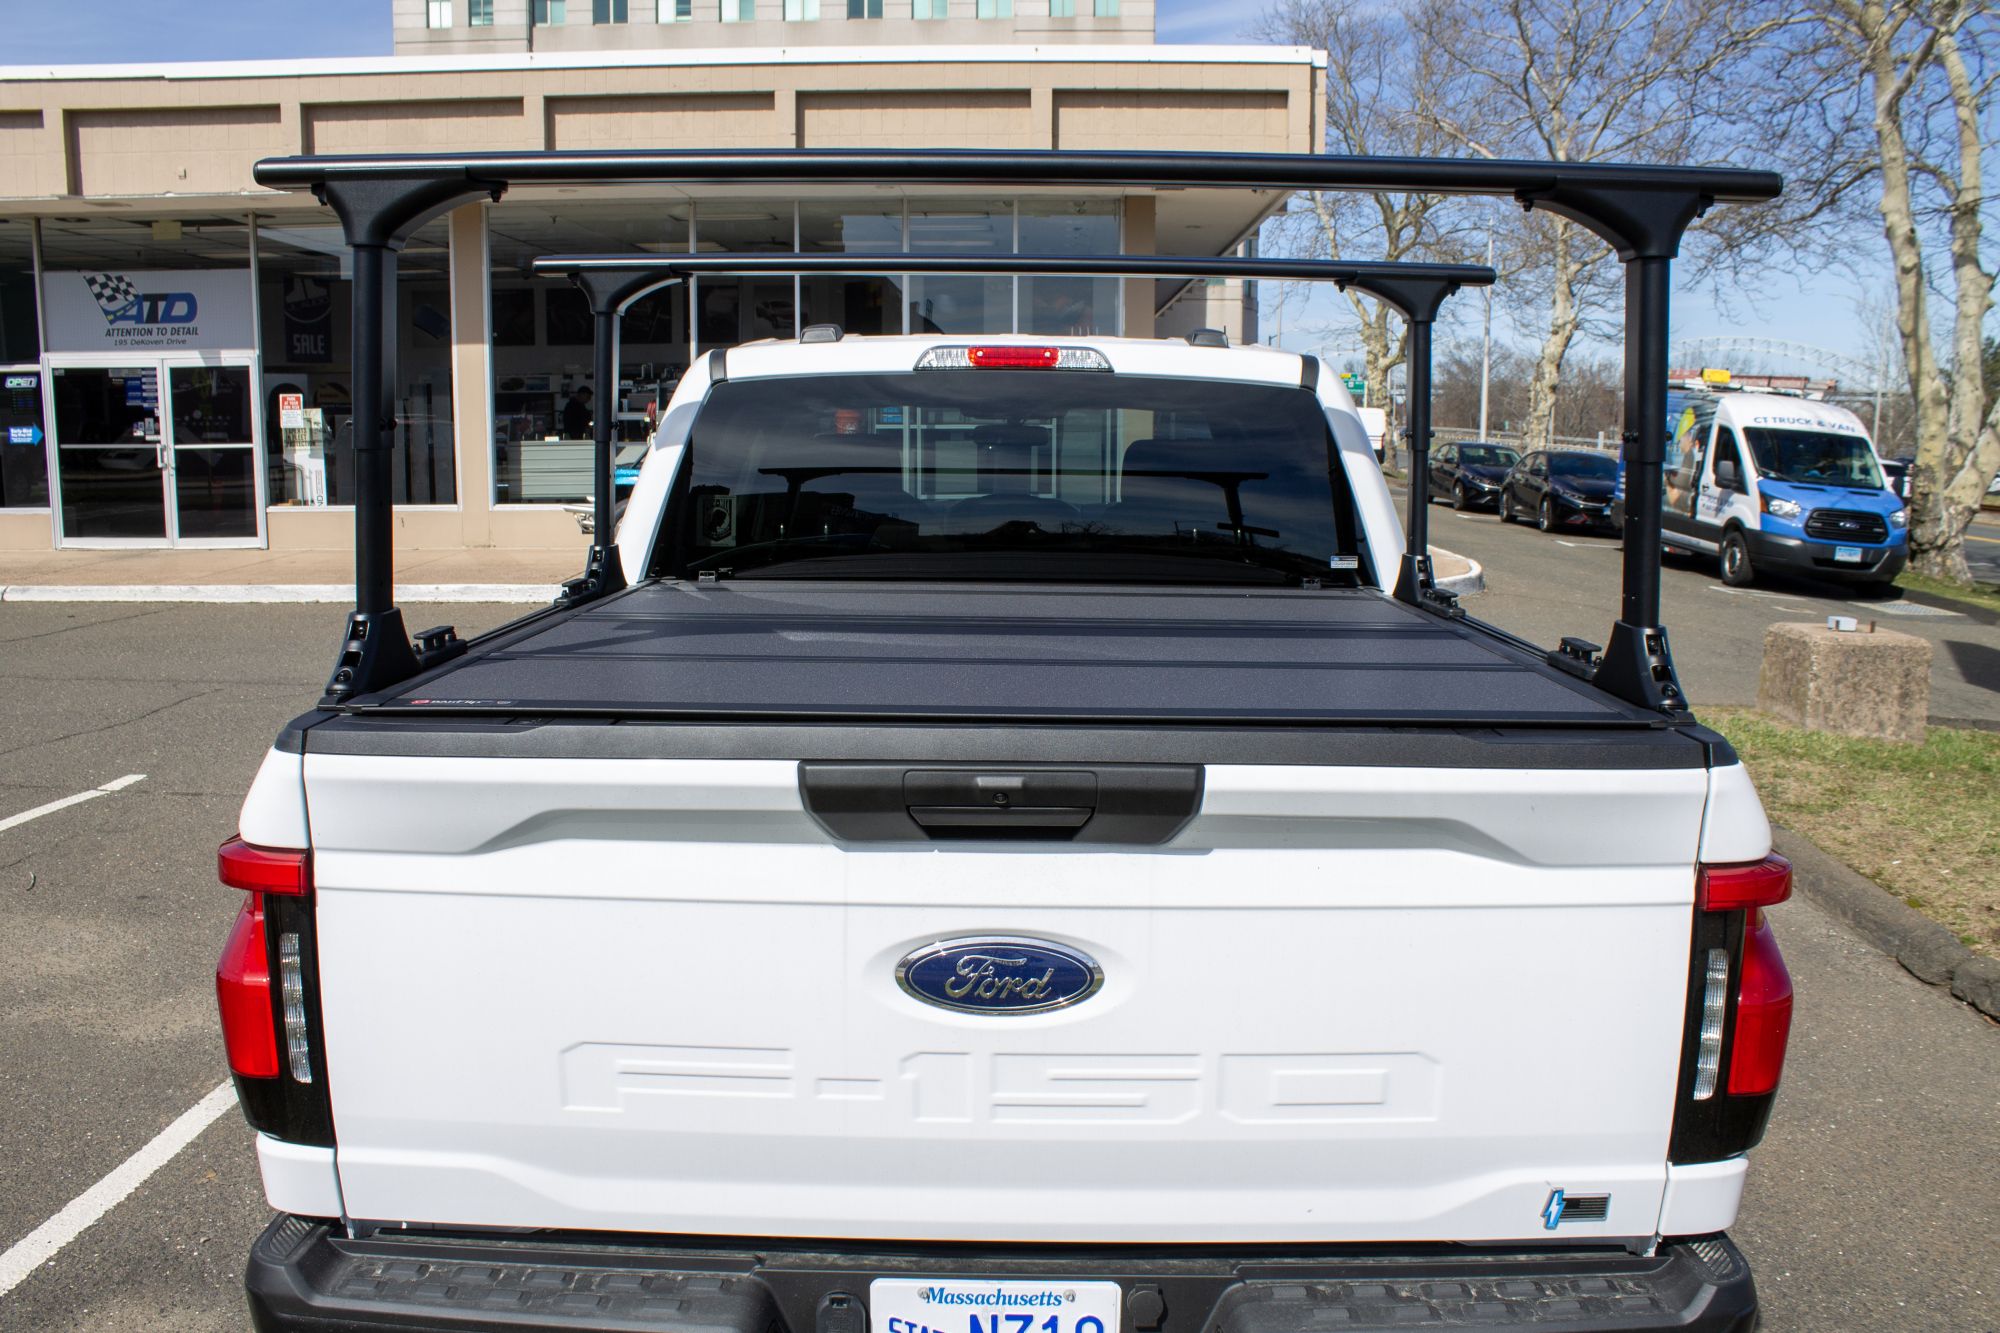 Tonneau Cover that works with a Ladder Rack